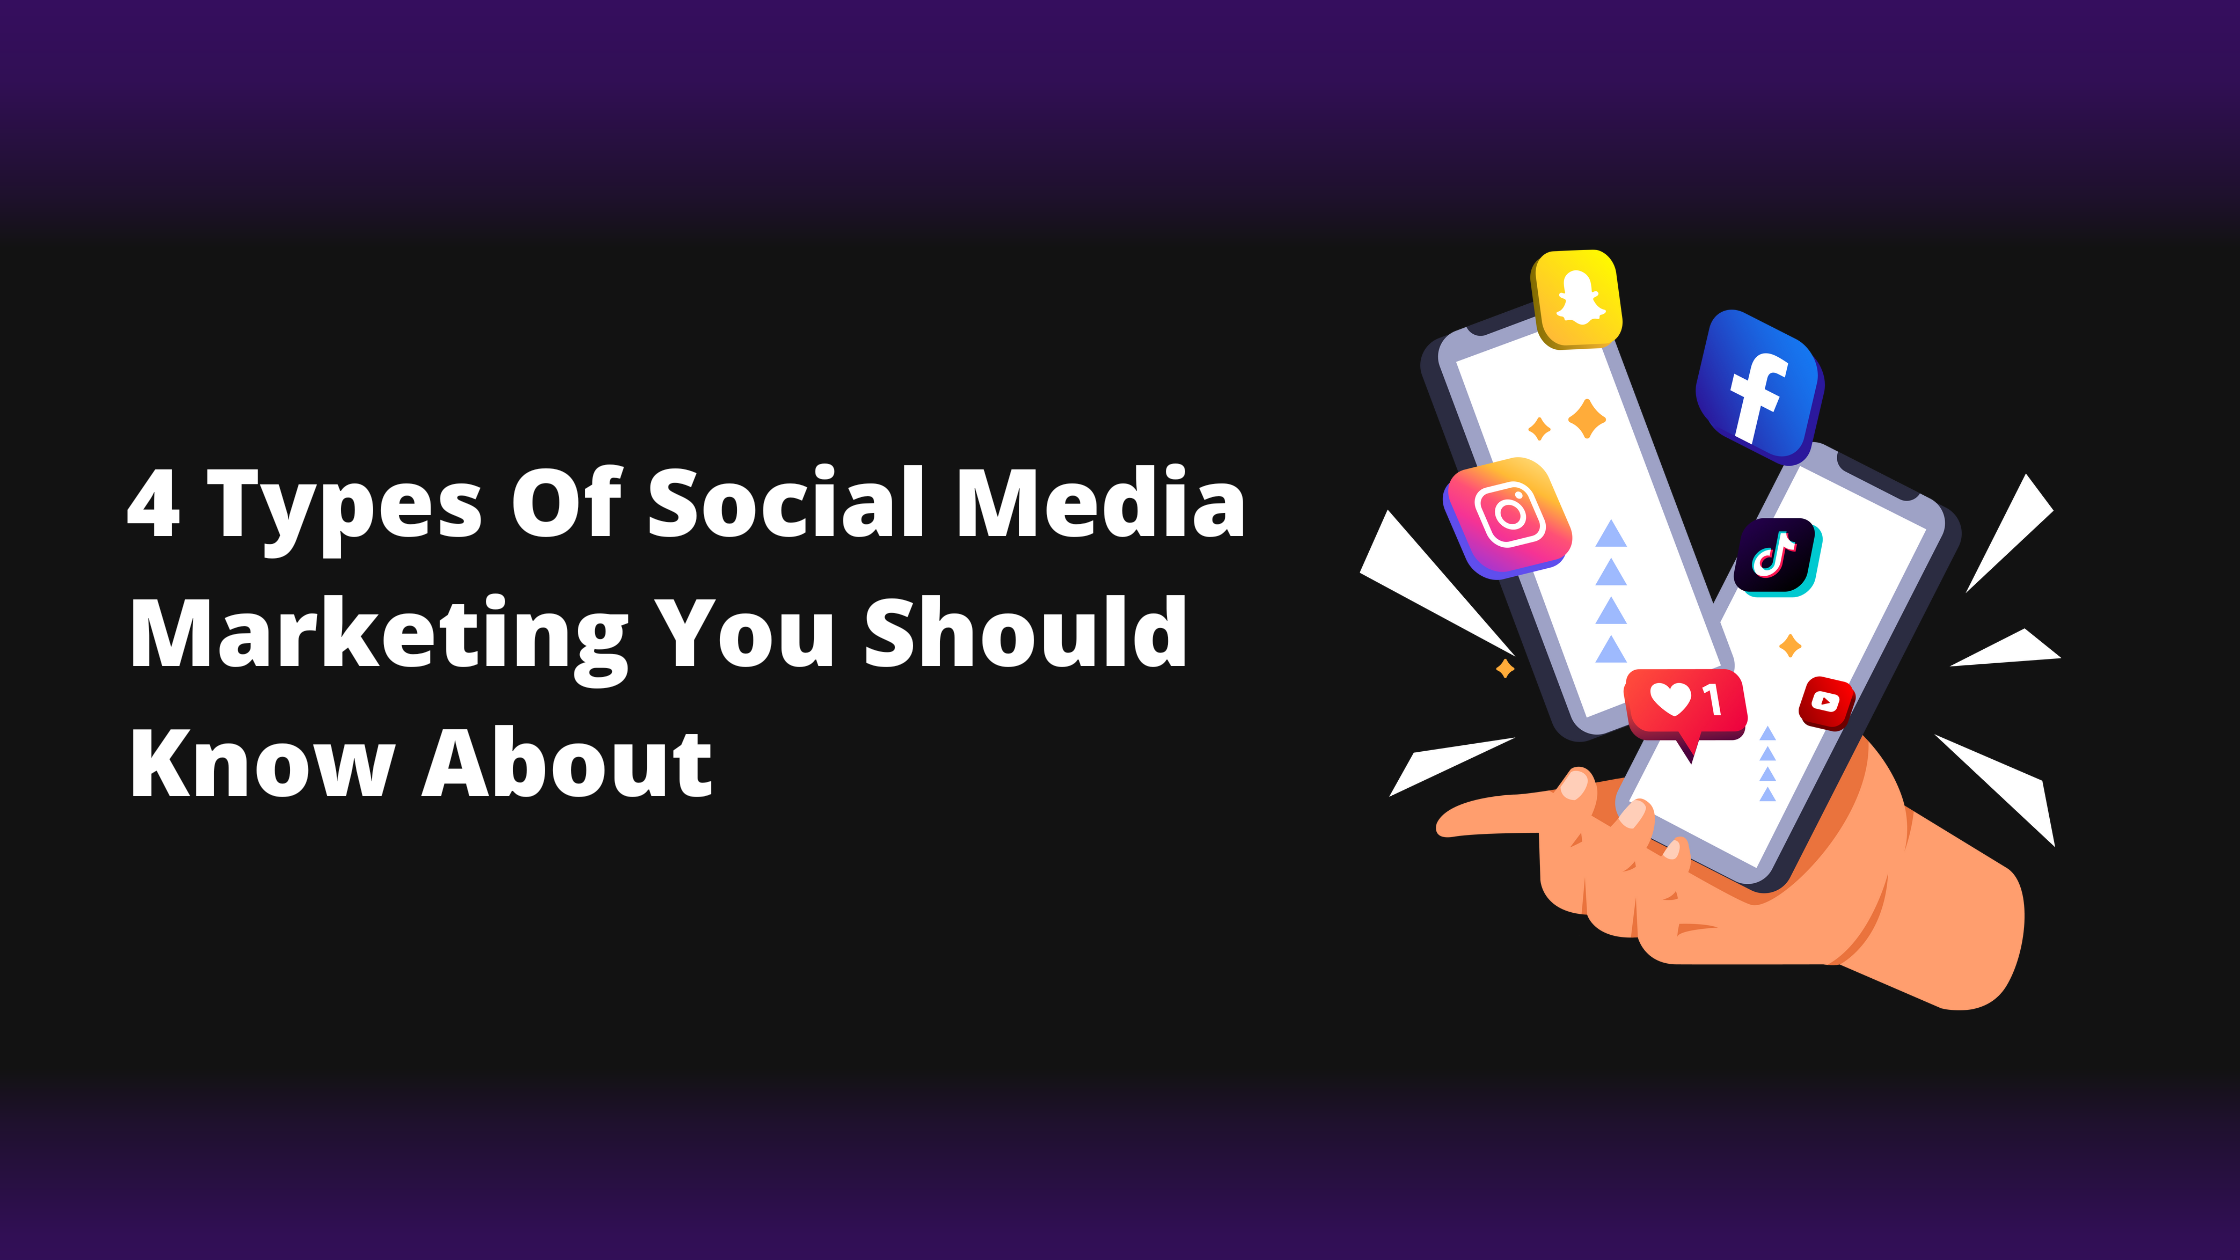 4 types of social media marketing you should know about